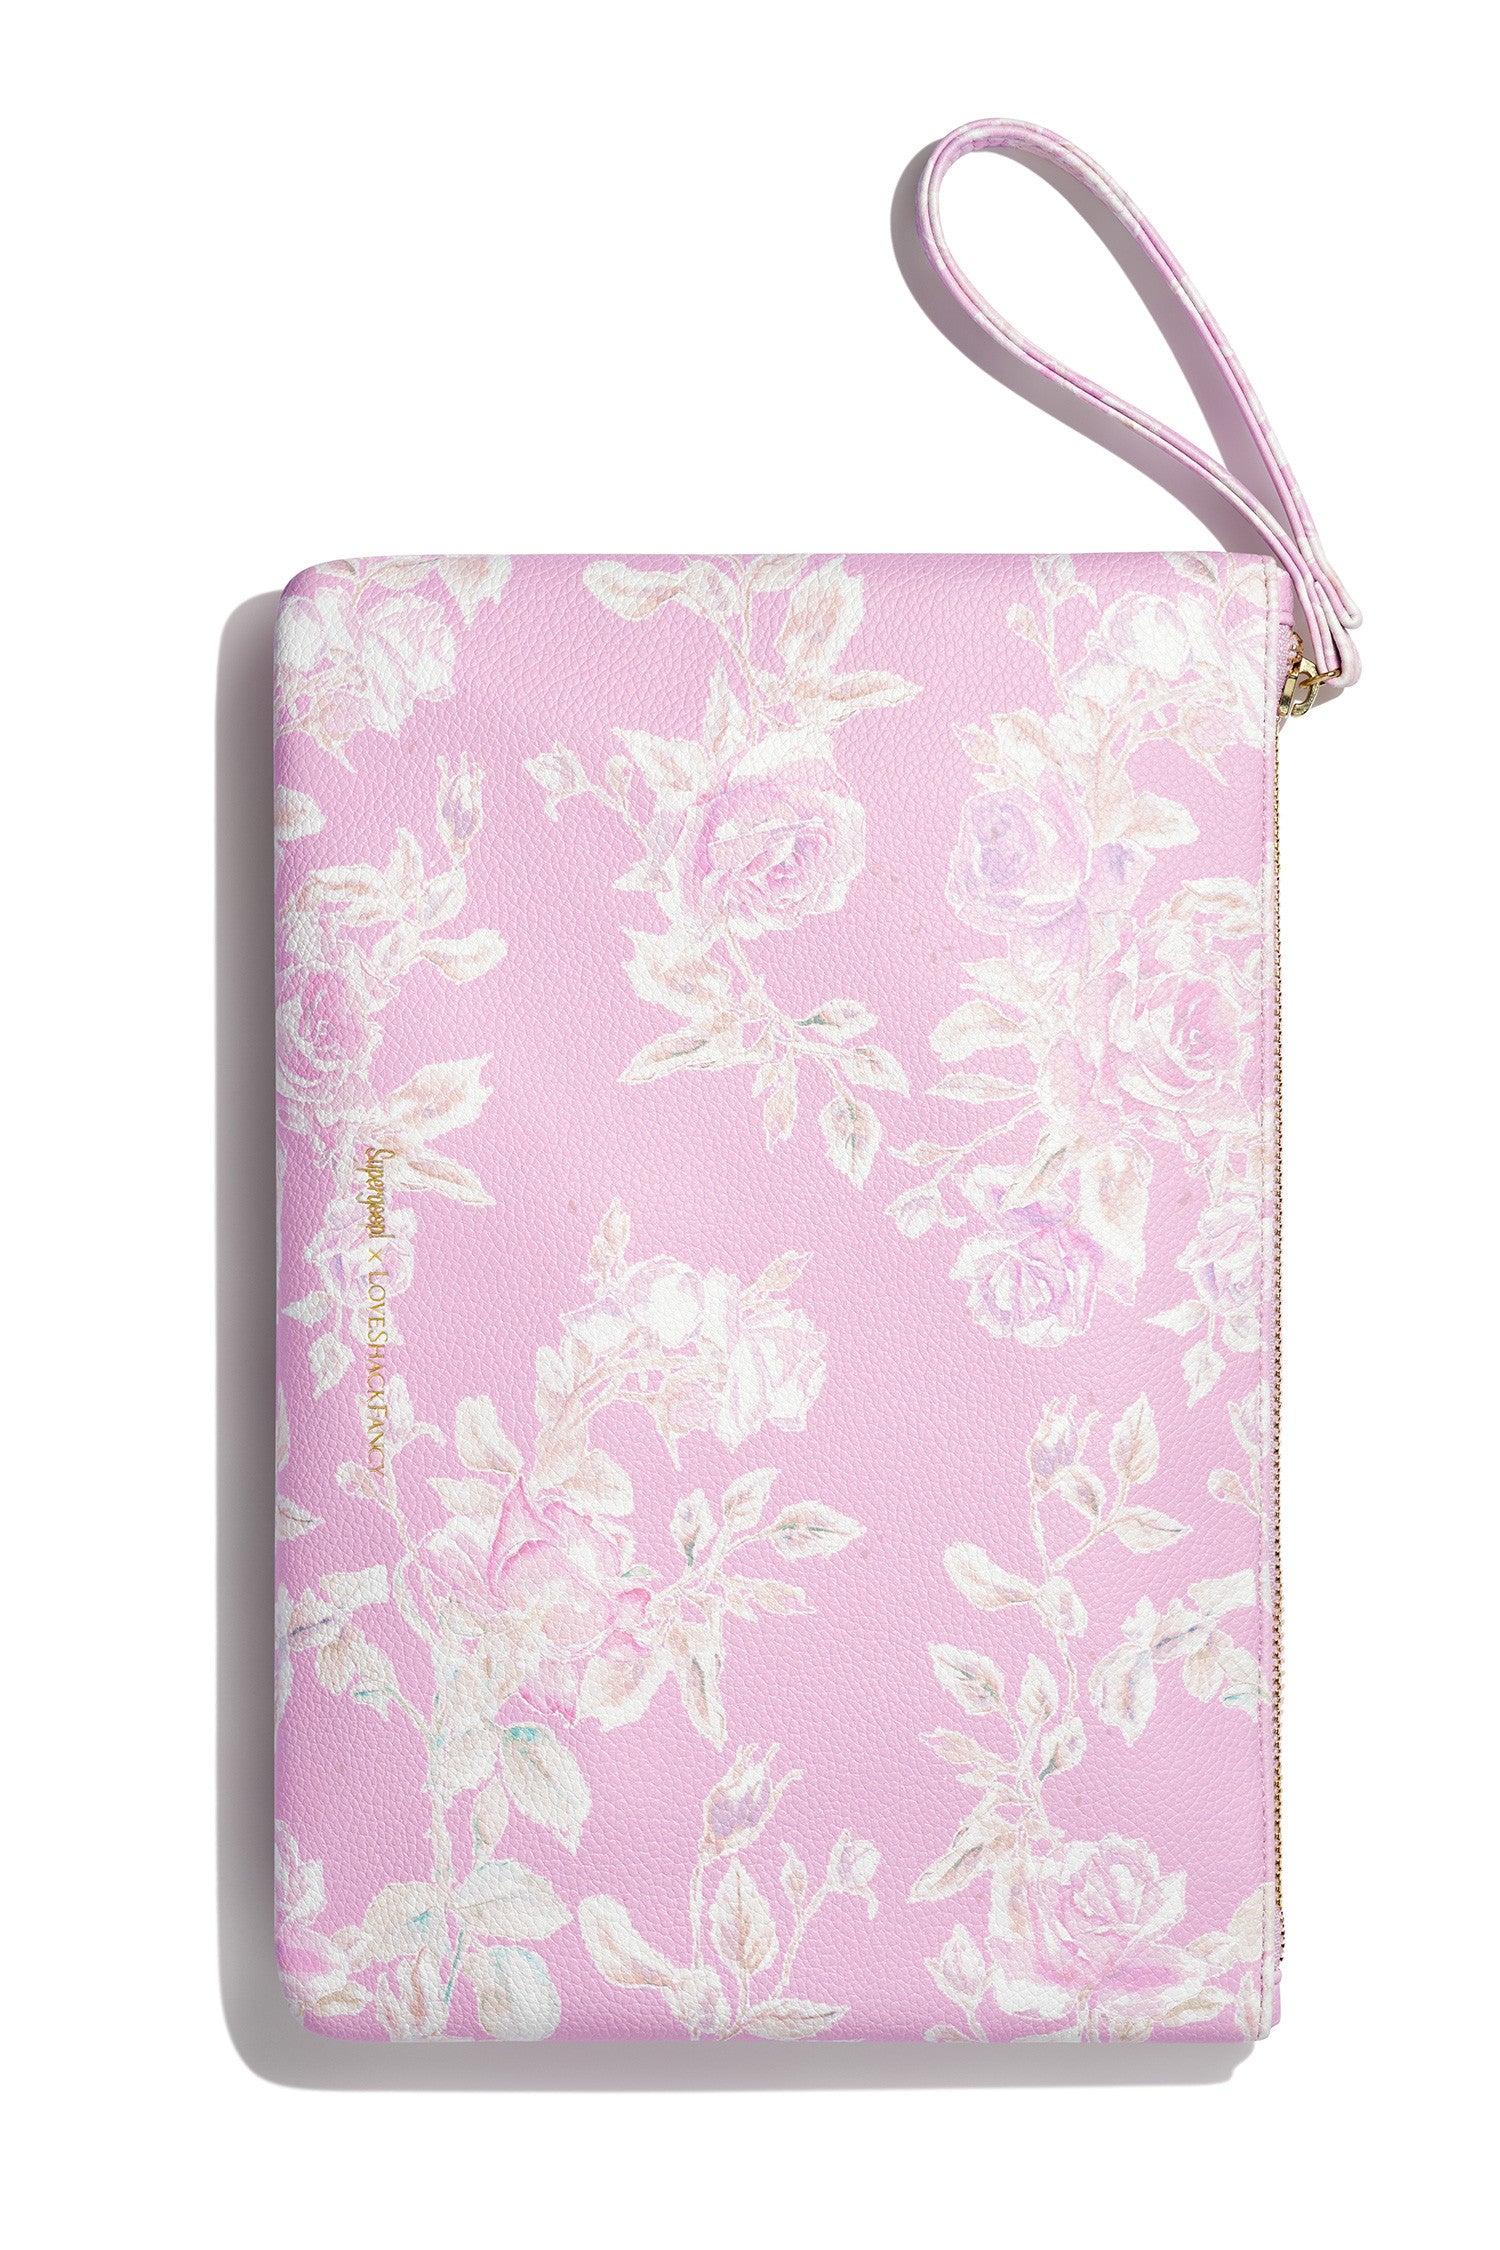 LSF floral leather pouch